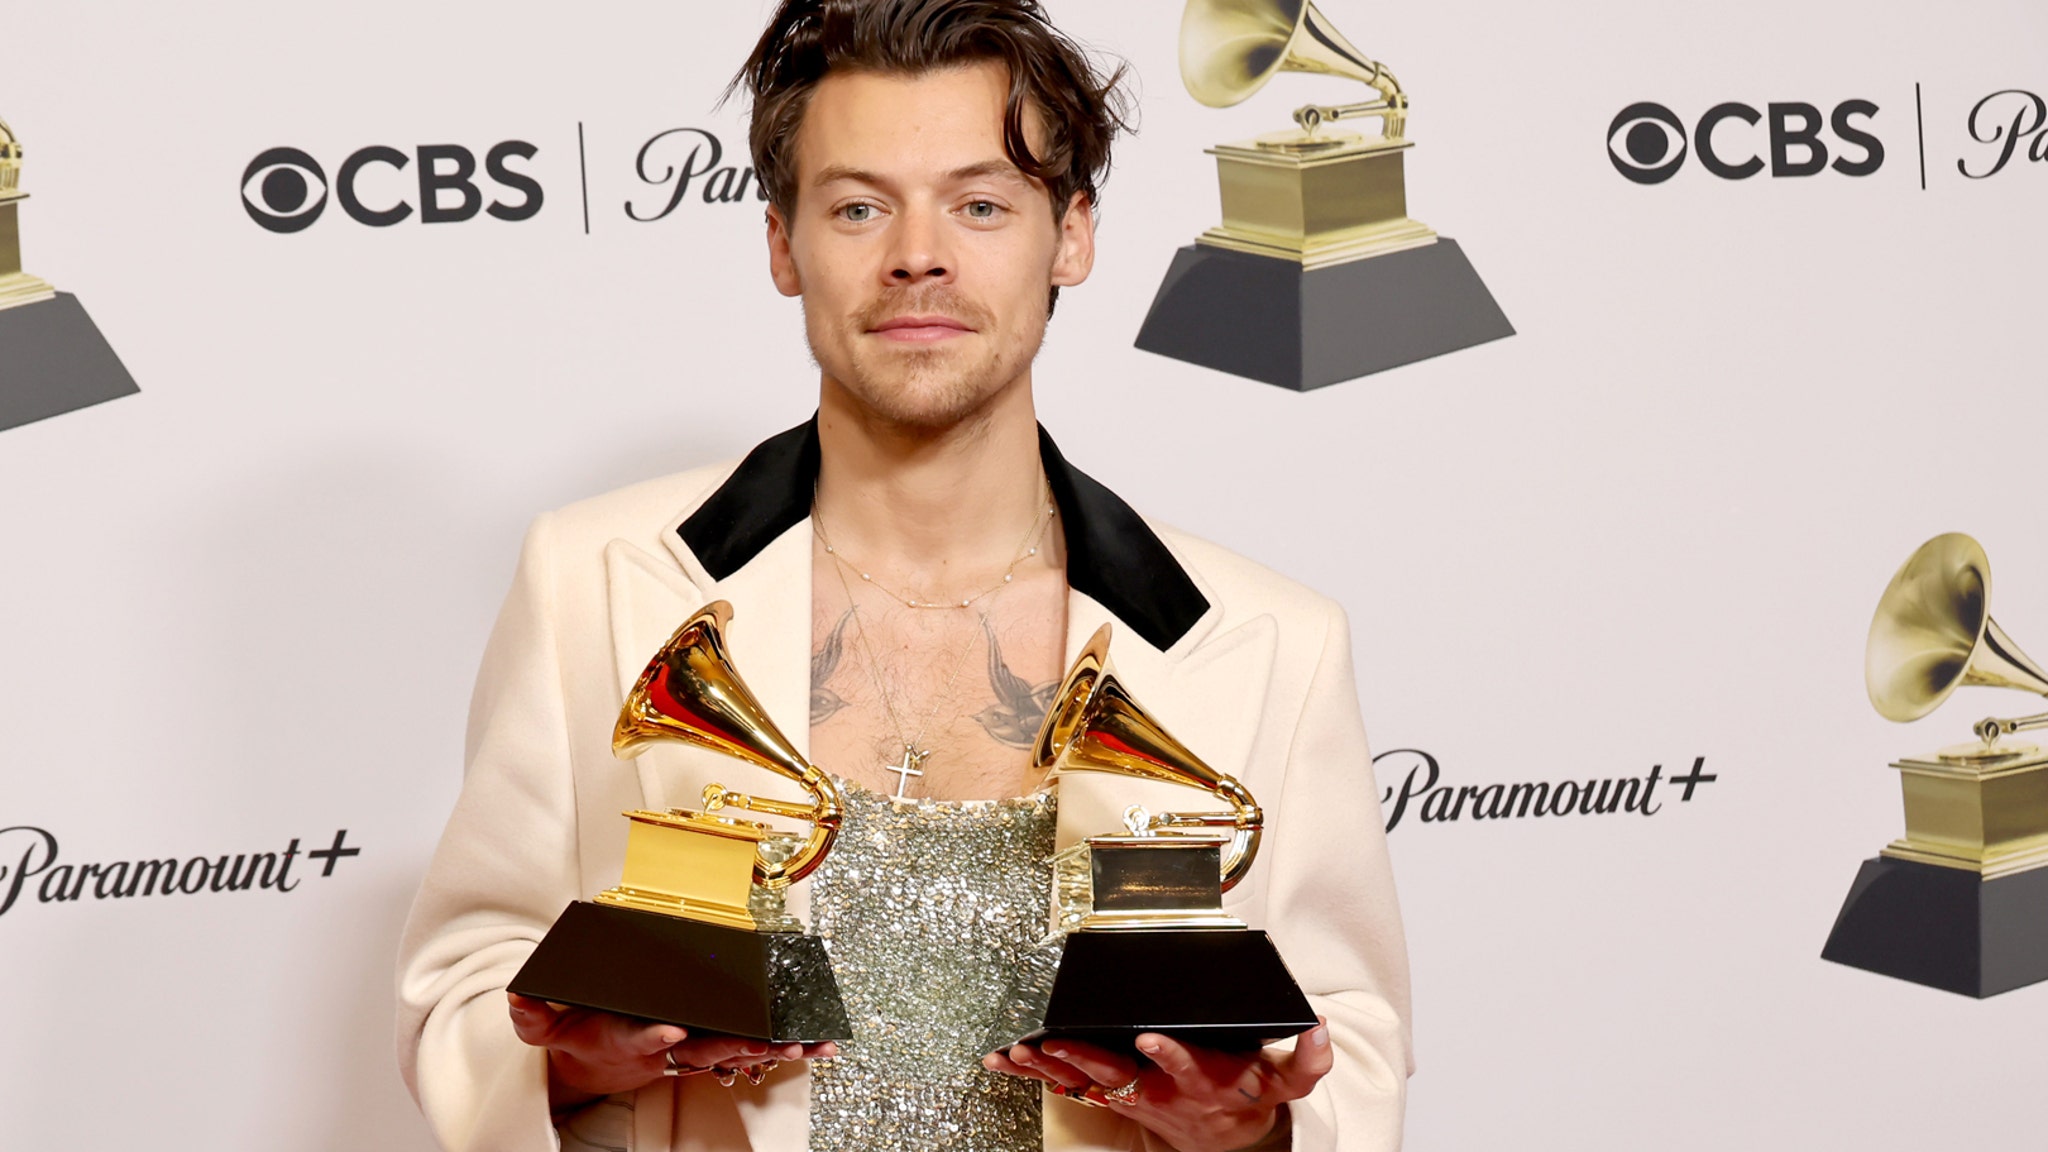 Harry Styles' Former One Direction Band Mates Celebrate His Grammy Wins